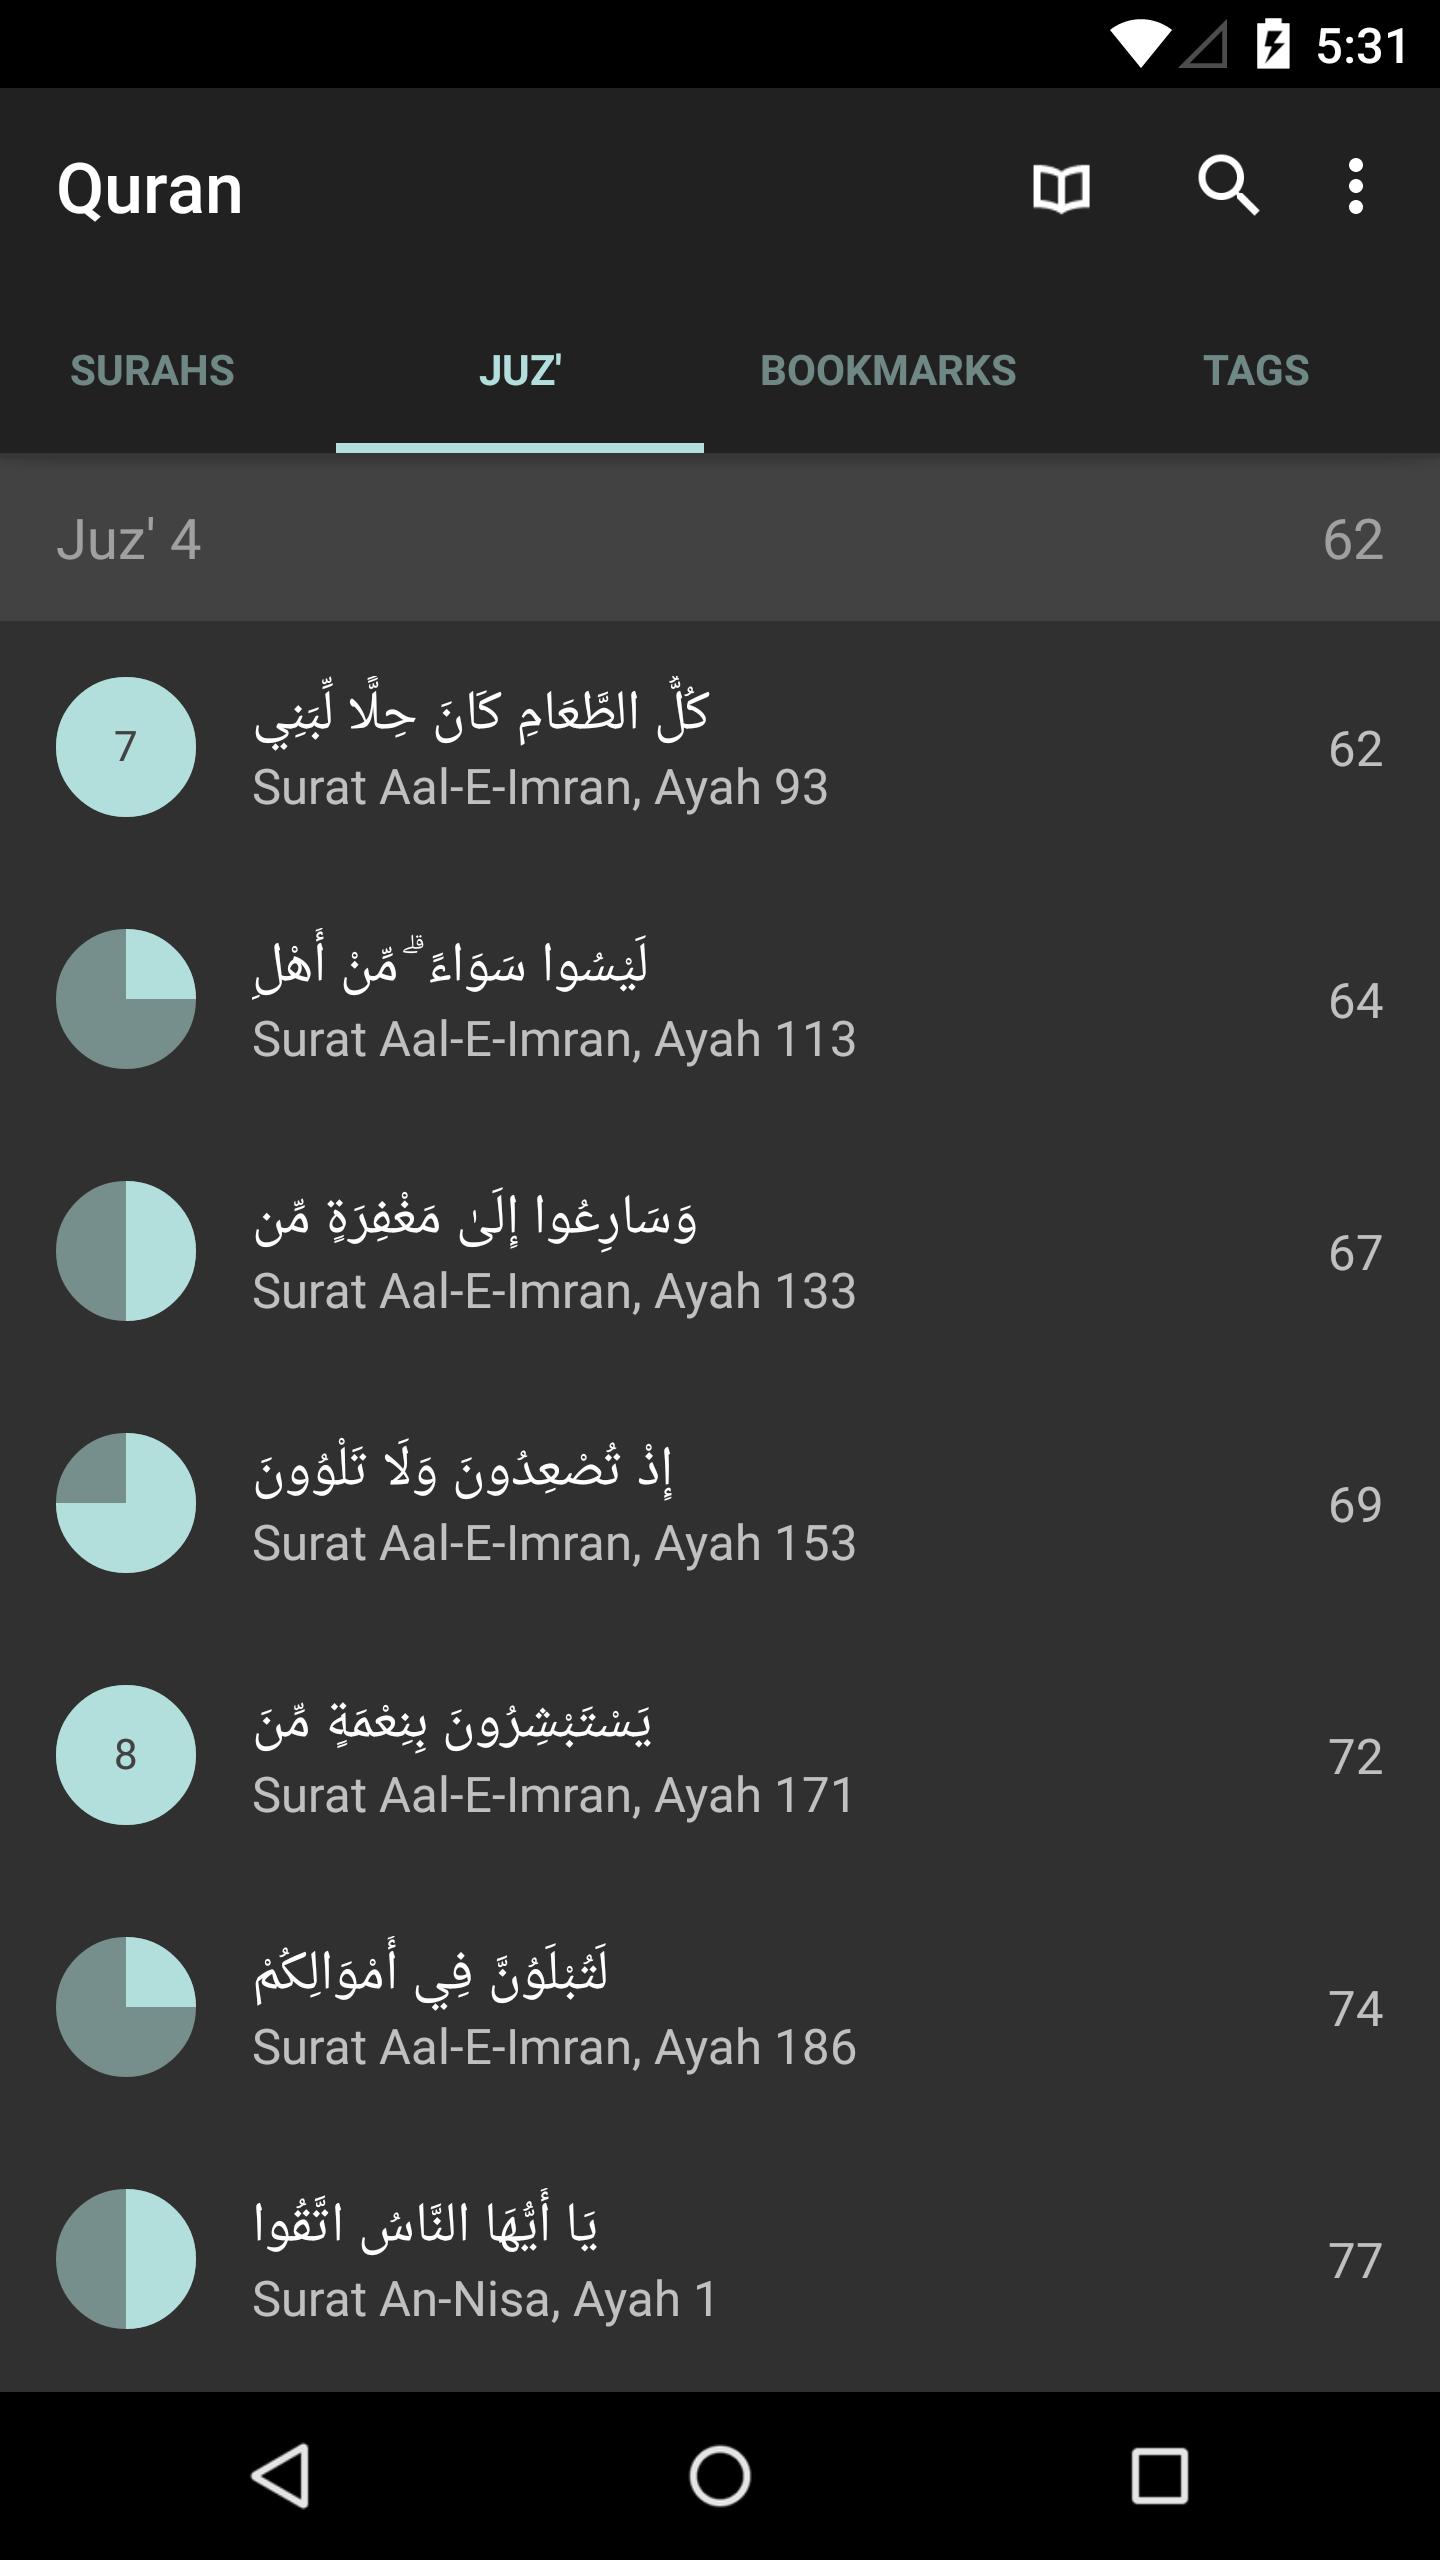 Quran for Android 3.0.2 Screenshot 2